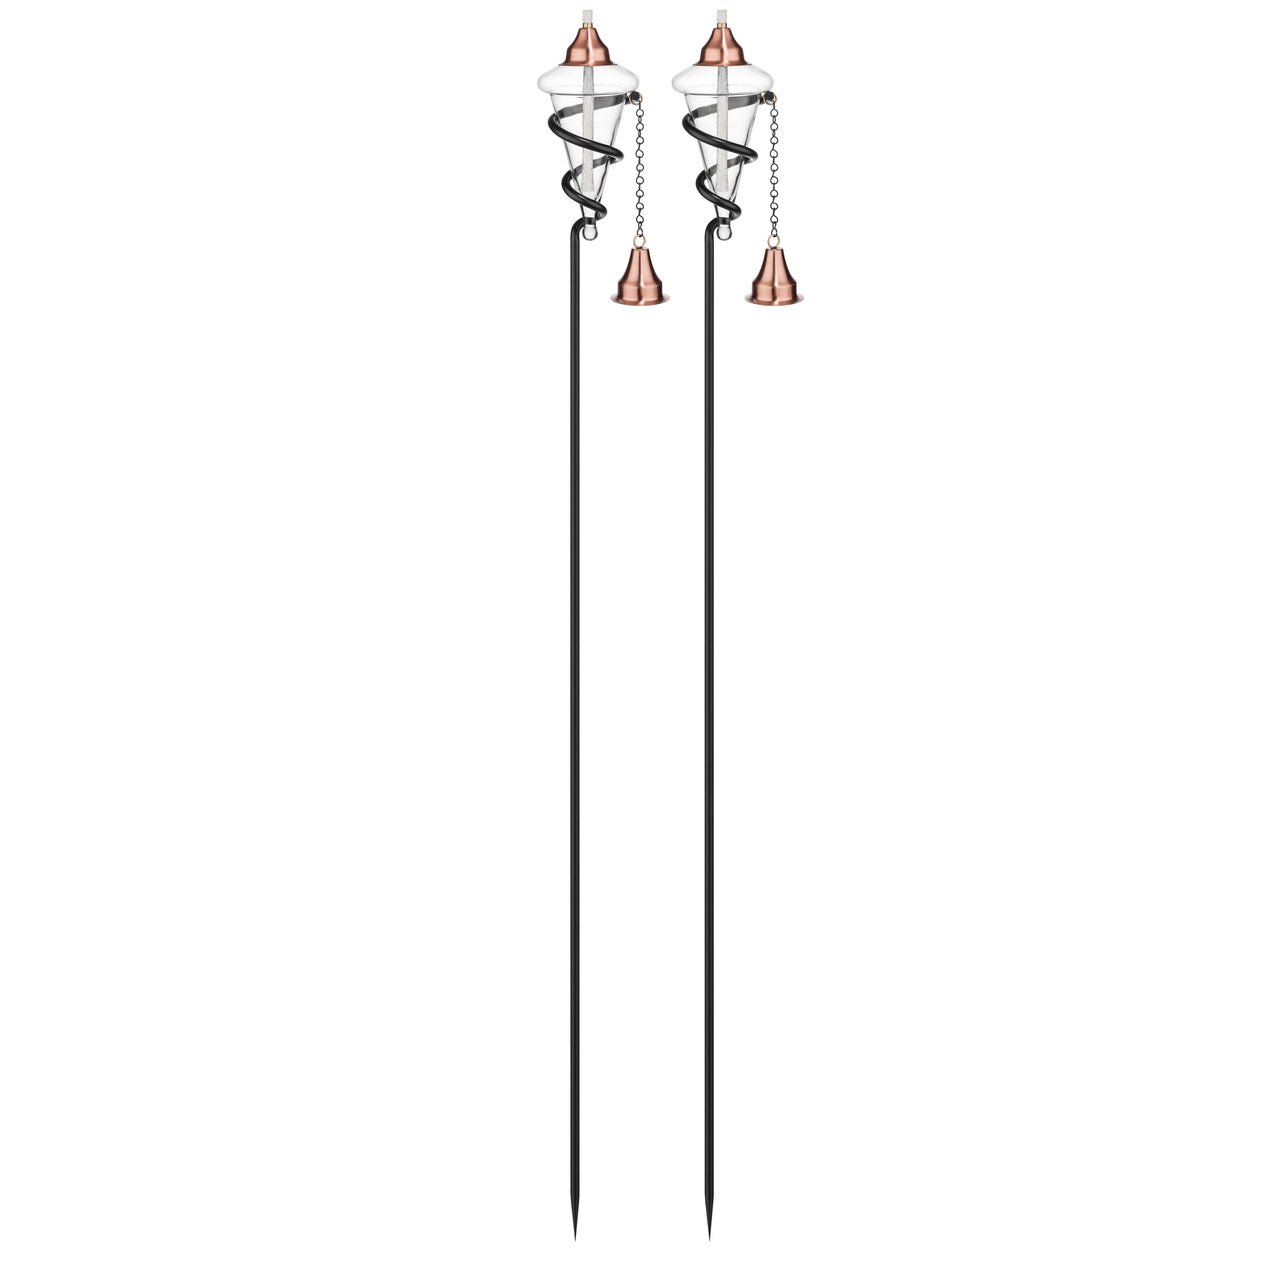 Tiki Torch by H Potter Outdoor Lighting Entertaining Wedding Party Swimming Pool Glass Metal Copper Snuffer Set of 2 two